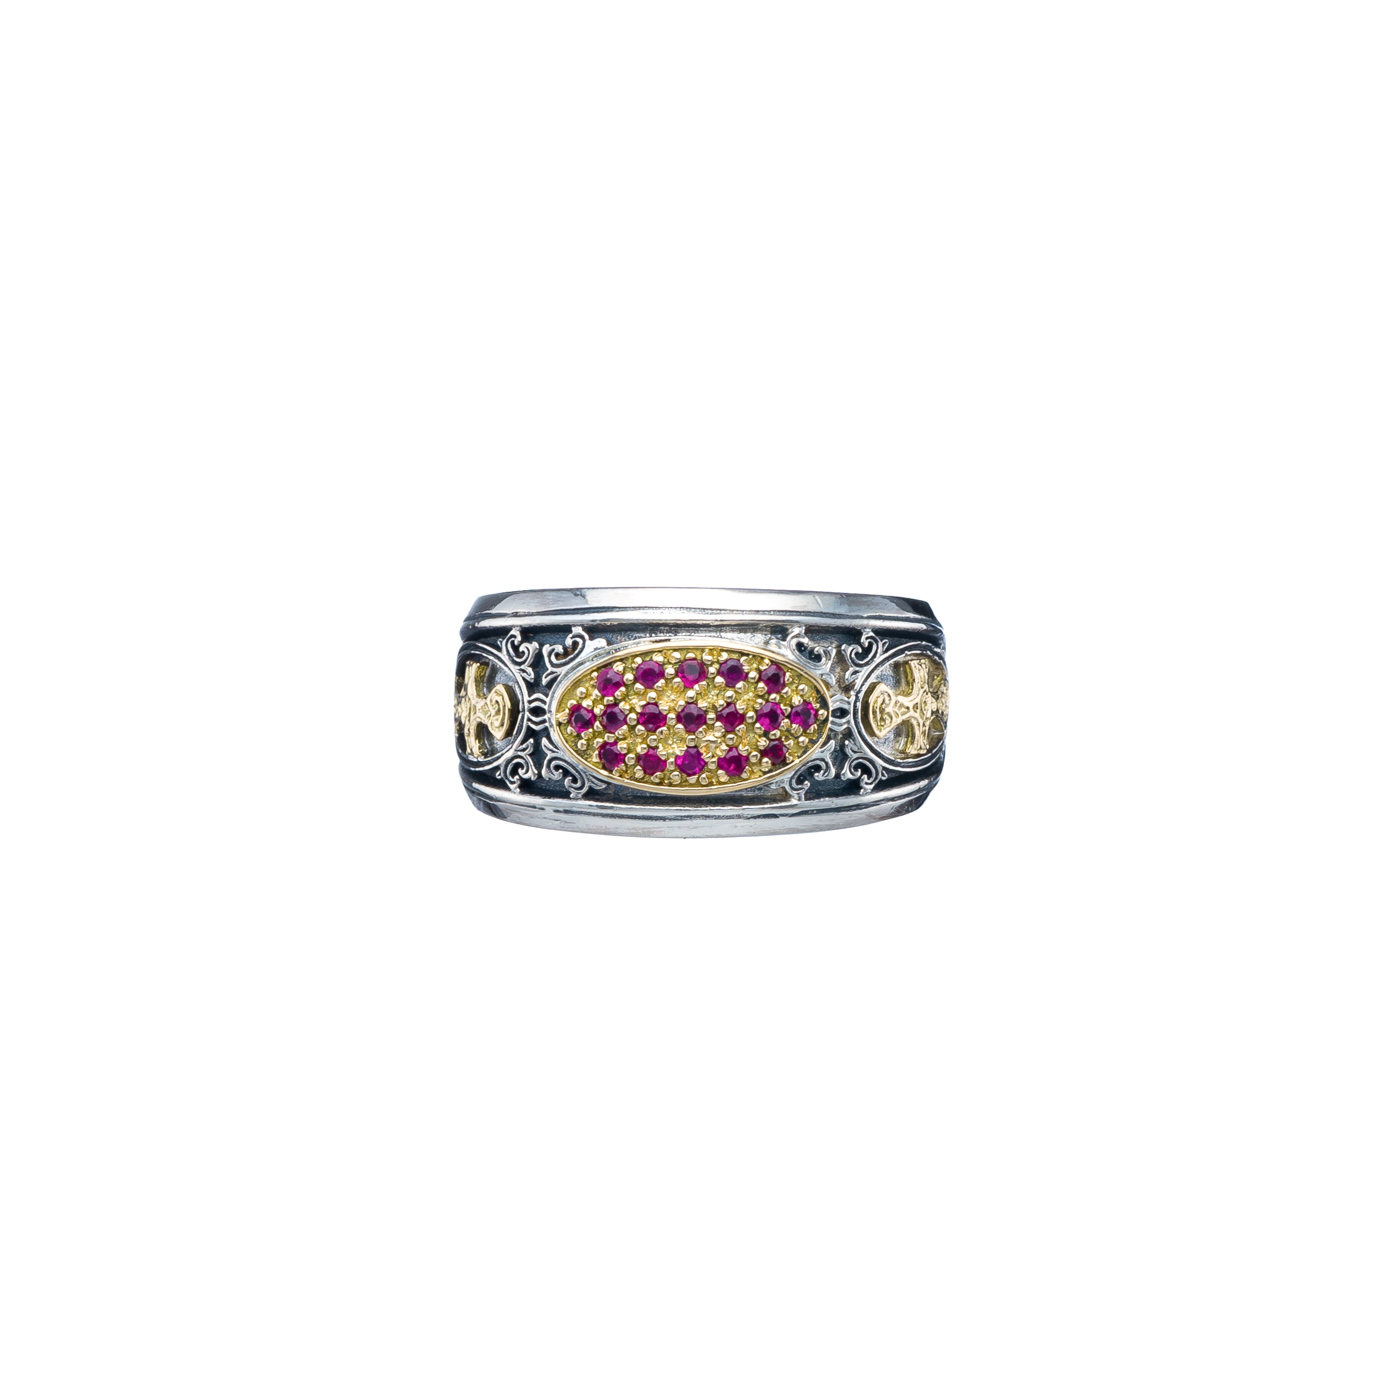 Patmos ring in 18K Gold and Sterling Silver with rubies